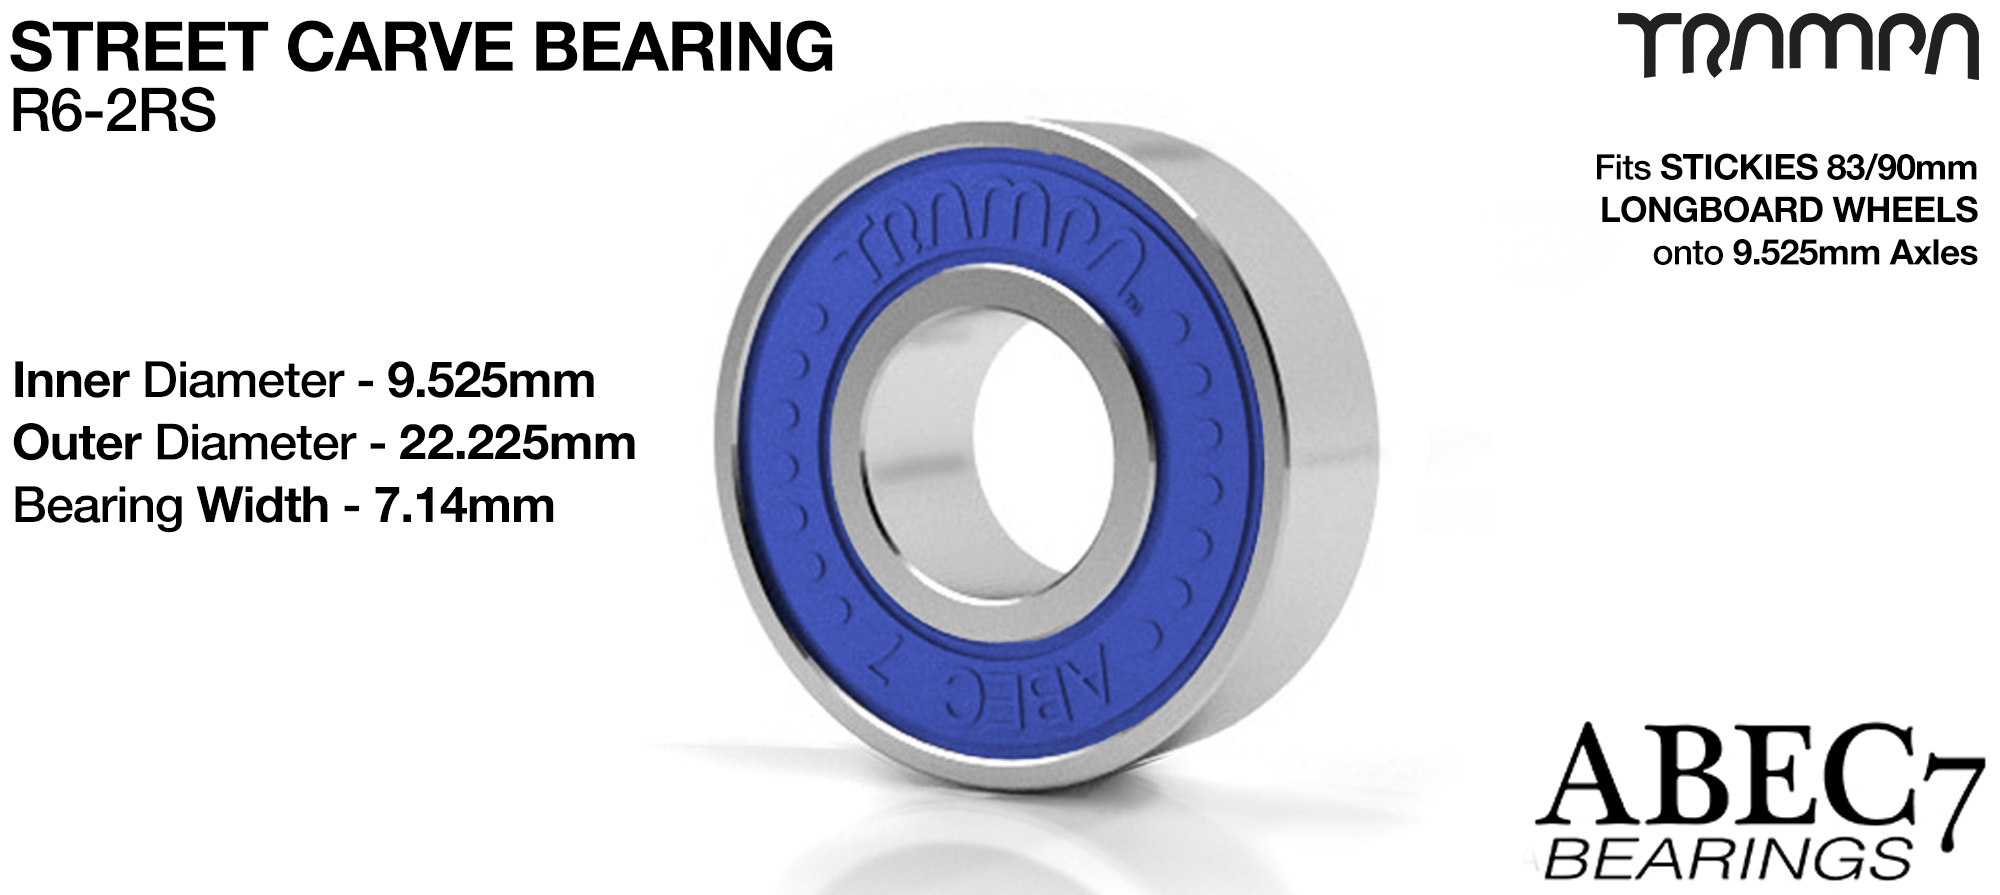 R6 2RS Abec 7 TRAMPA STREET CARVE Bearing used to fit STICKIES Longboard Wheels to 9.525mm Axels (9.525 x 22.225 x 7.14mm) - BLUE